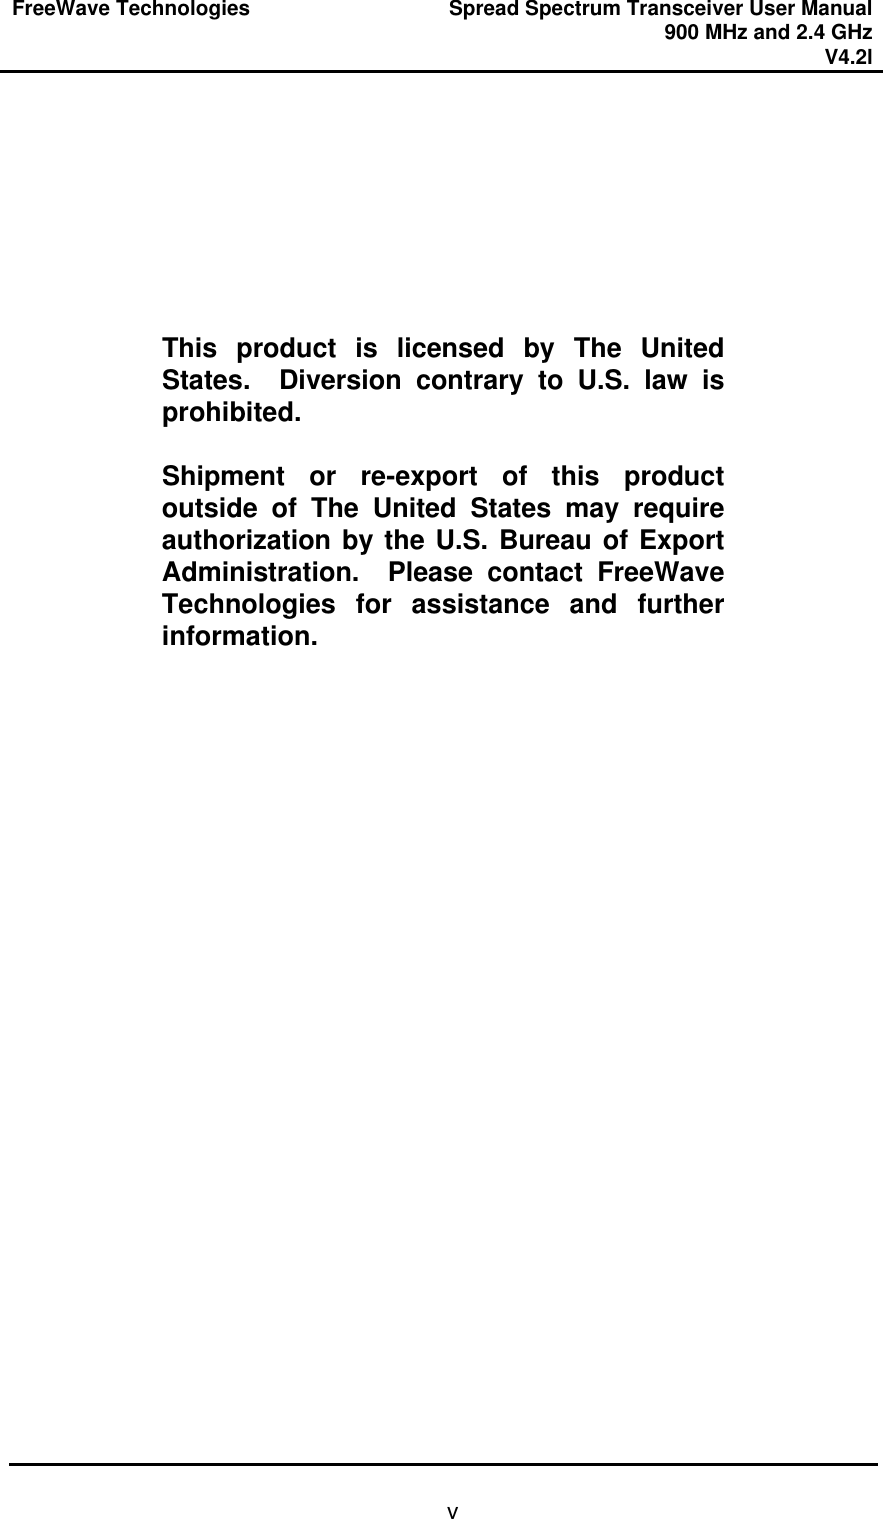 FreeWave Technologies Spread Spectrum Transceiver User Manual 900 MHz and 2.4 GHz V4.2l   v        This product is licensed by The United States.  Diversion contrary to U.S. law is prohibited.  Shipment or re-export of this product outside of The United States may require authorization by the U.S. Bureau of Export Administration.  Please contact FreeWave Technologies for assistance and further information.  